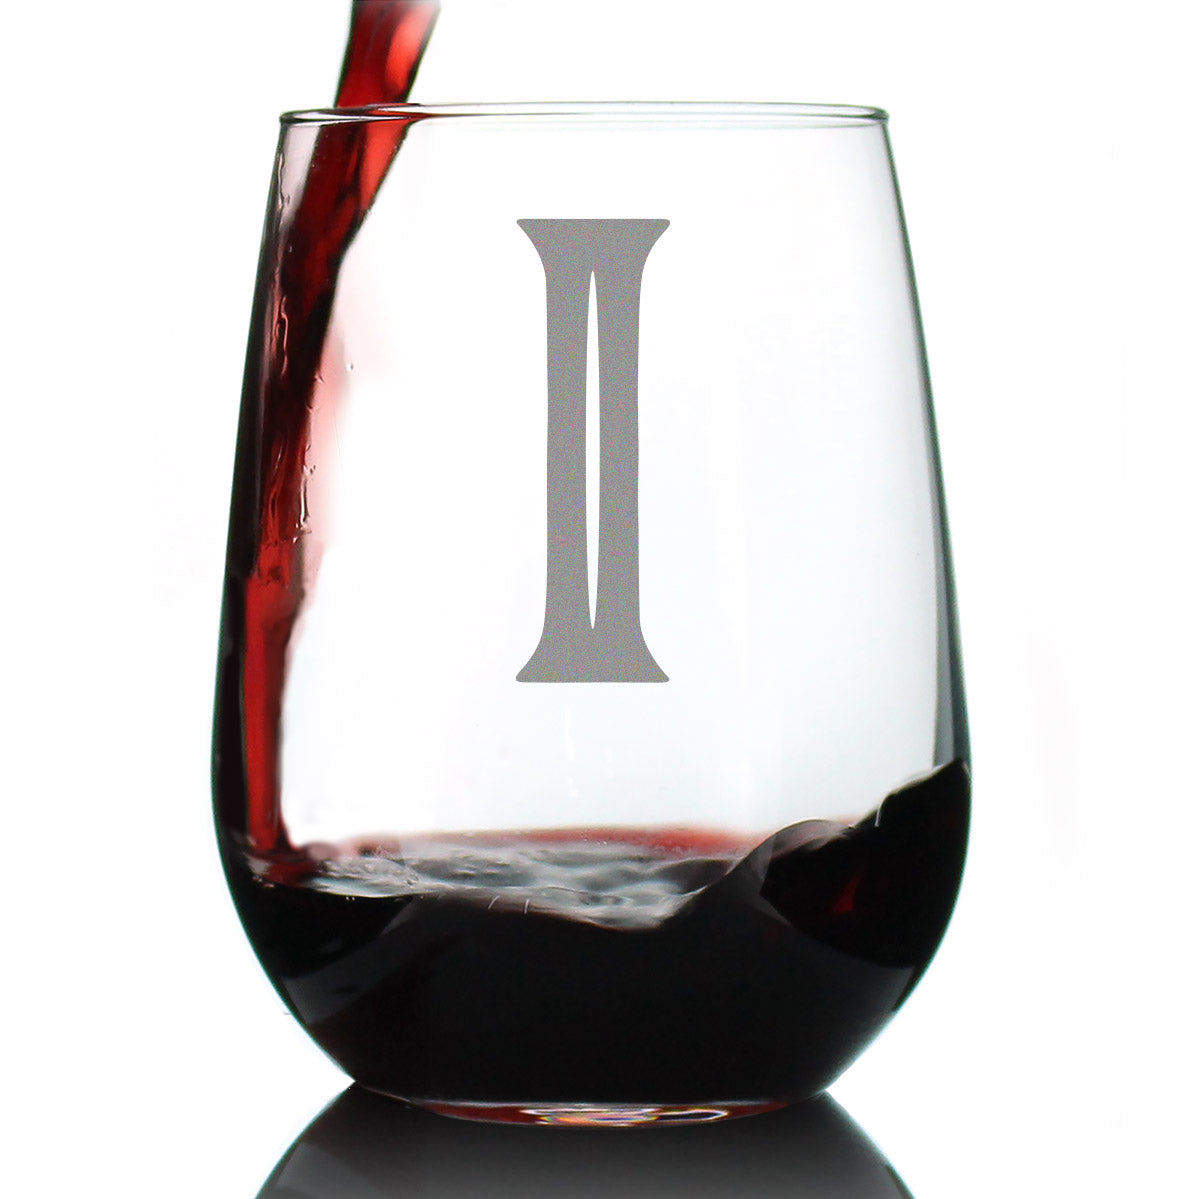 Monogram Bold Letter I - Stemless Wine Glass - Personalized Gifts for Women and Men - Large Engraved Glasses